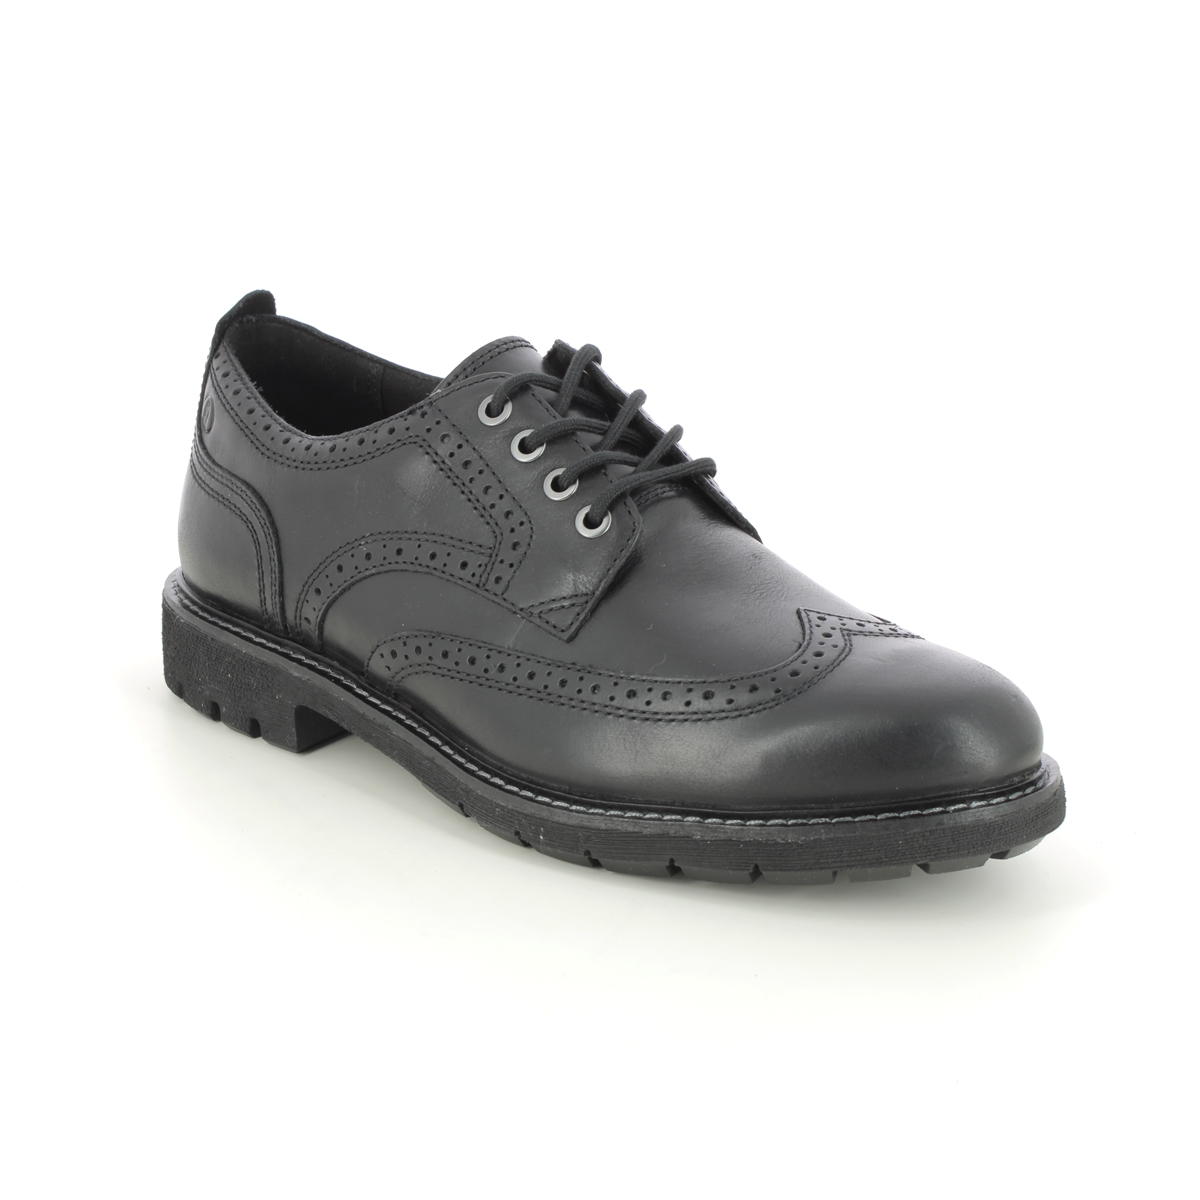 Clarks Batcombe Far Wing Black Leather Mens Brogues 734387G In Size 12 In Plain Black Leather G Width Fitting